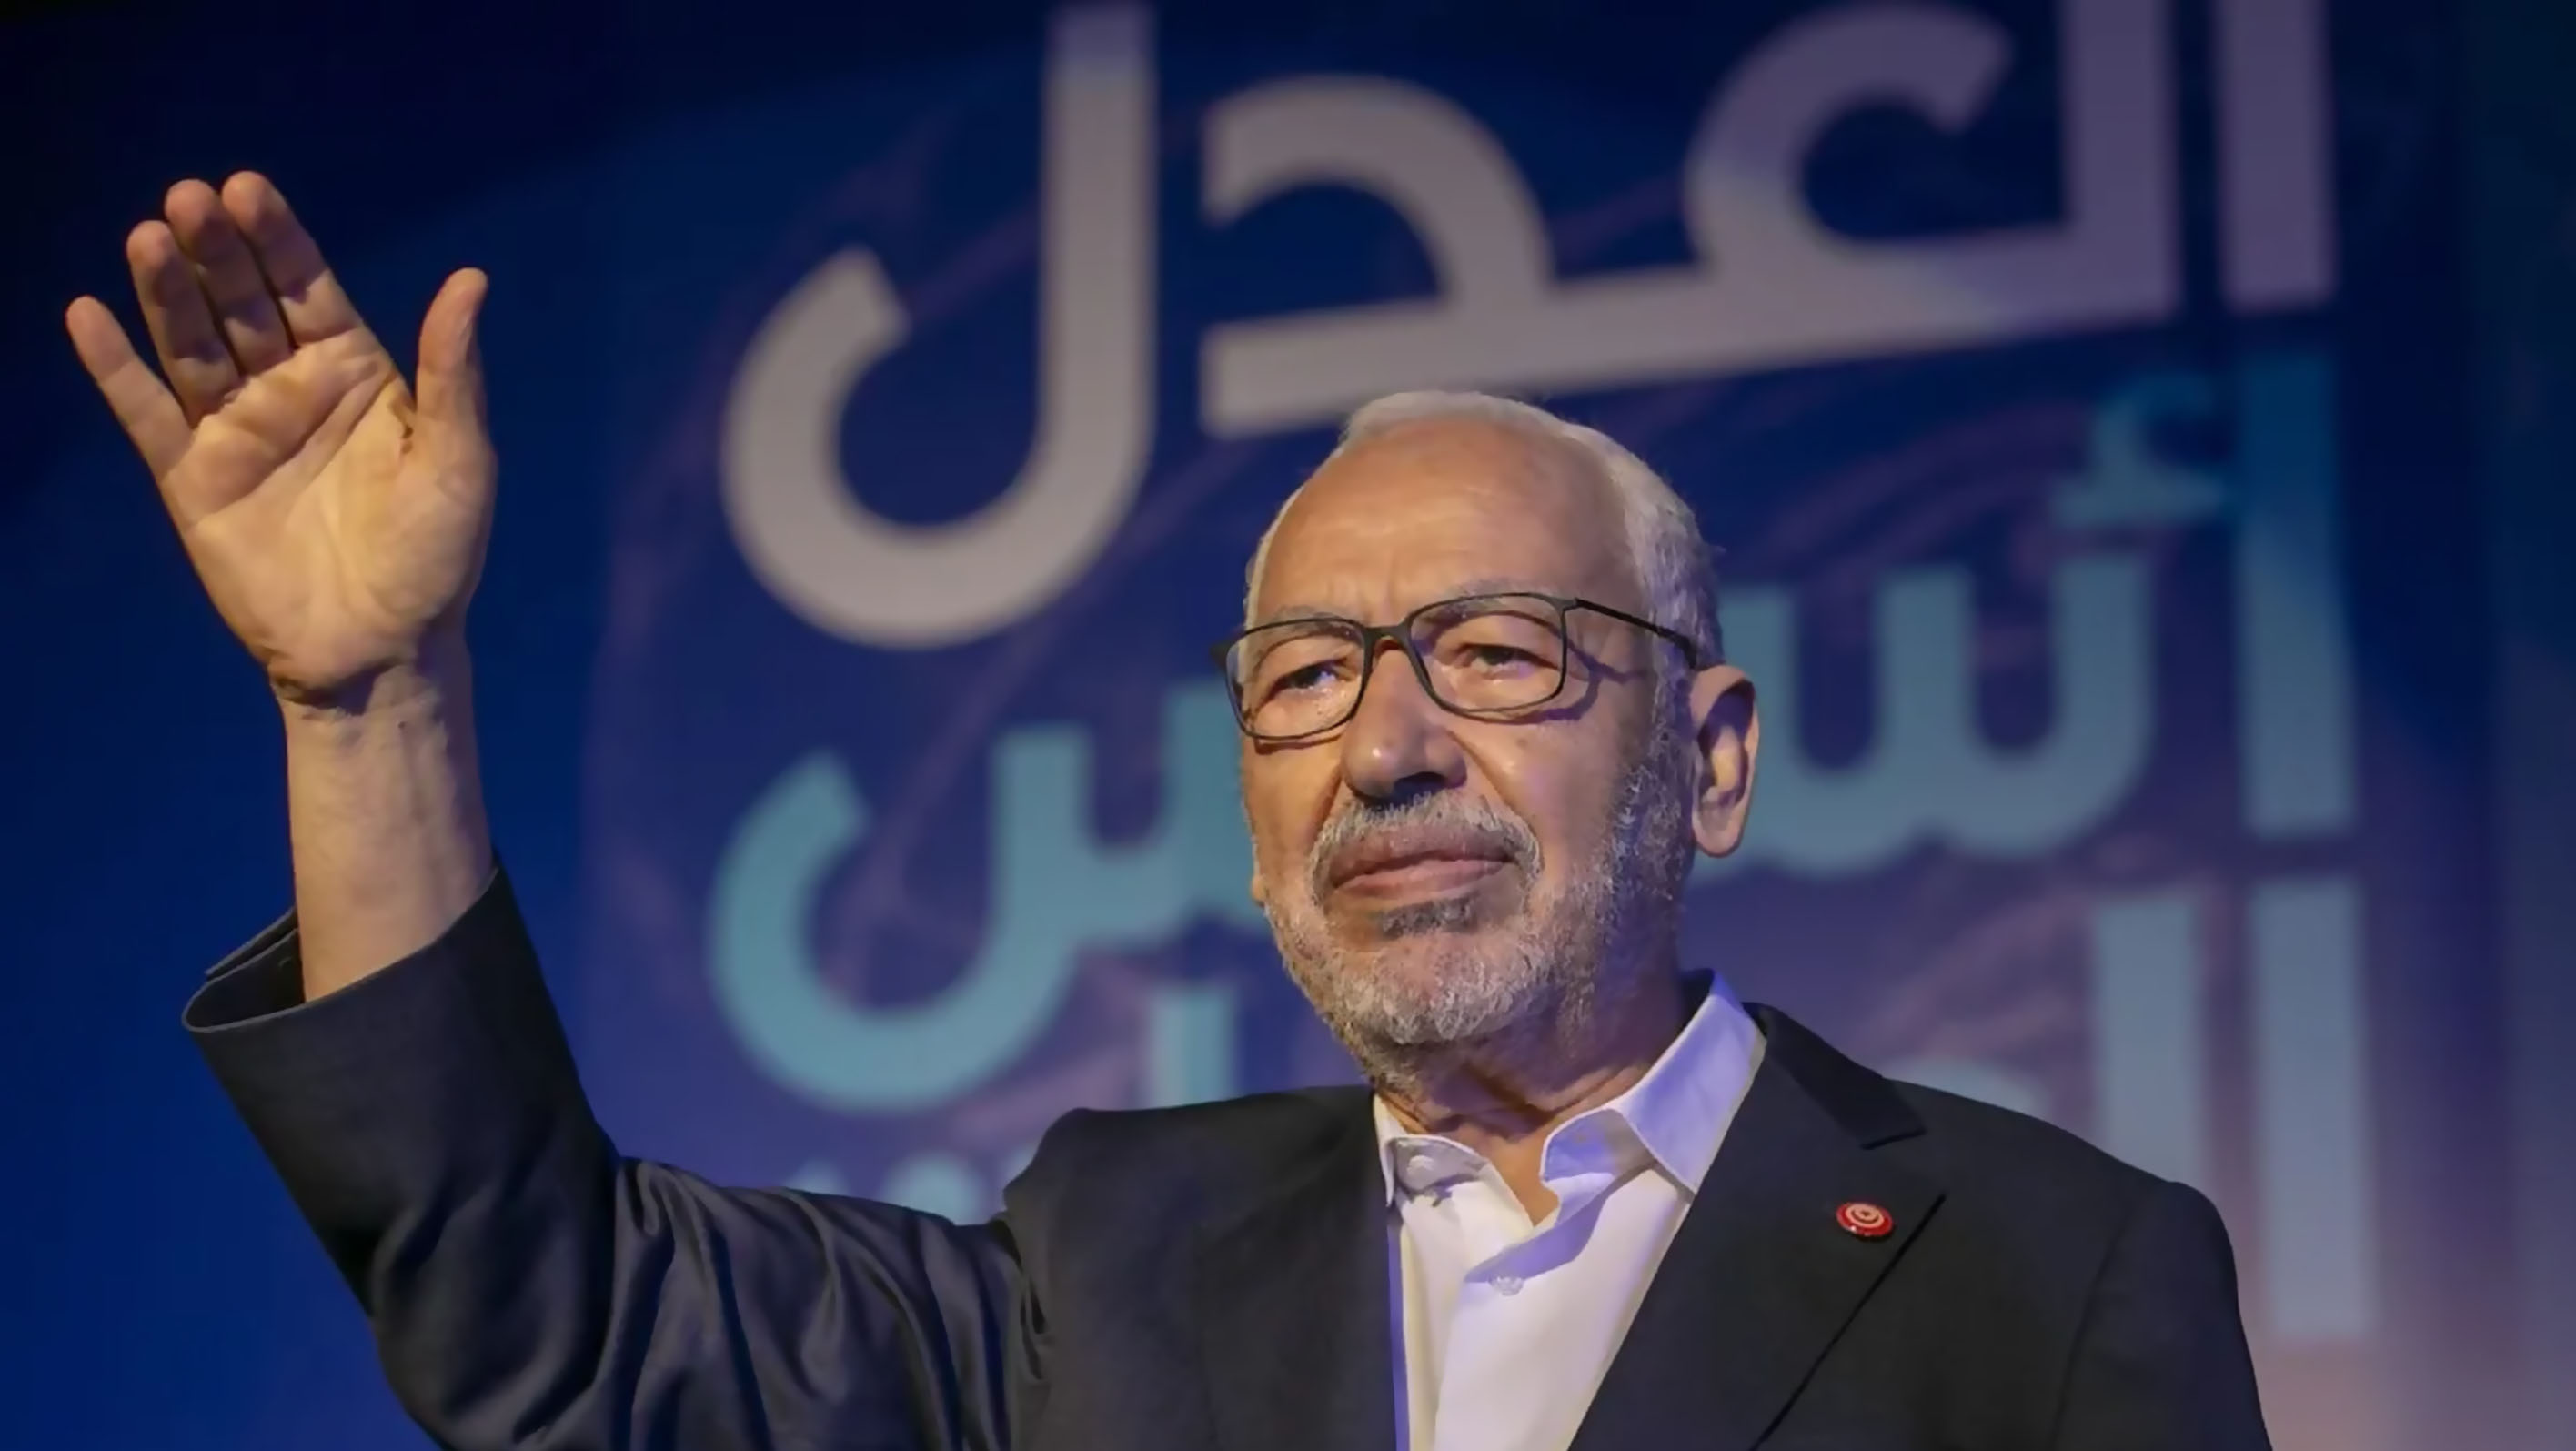 Karman extends birthday wishes to imprisoned Tunisian leader Ghannouchi